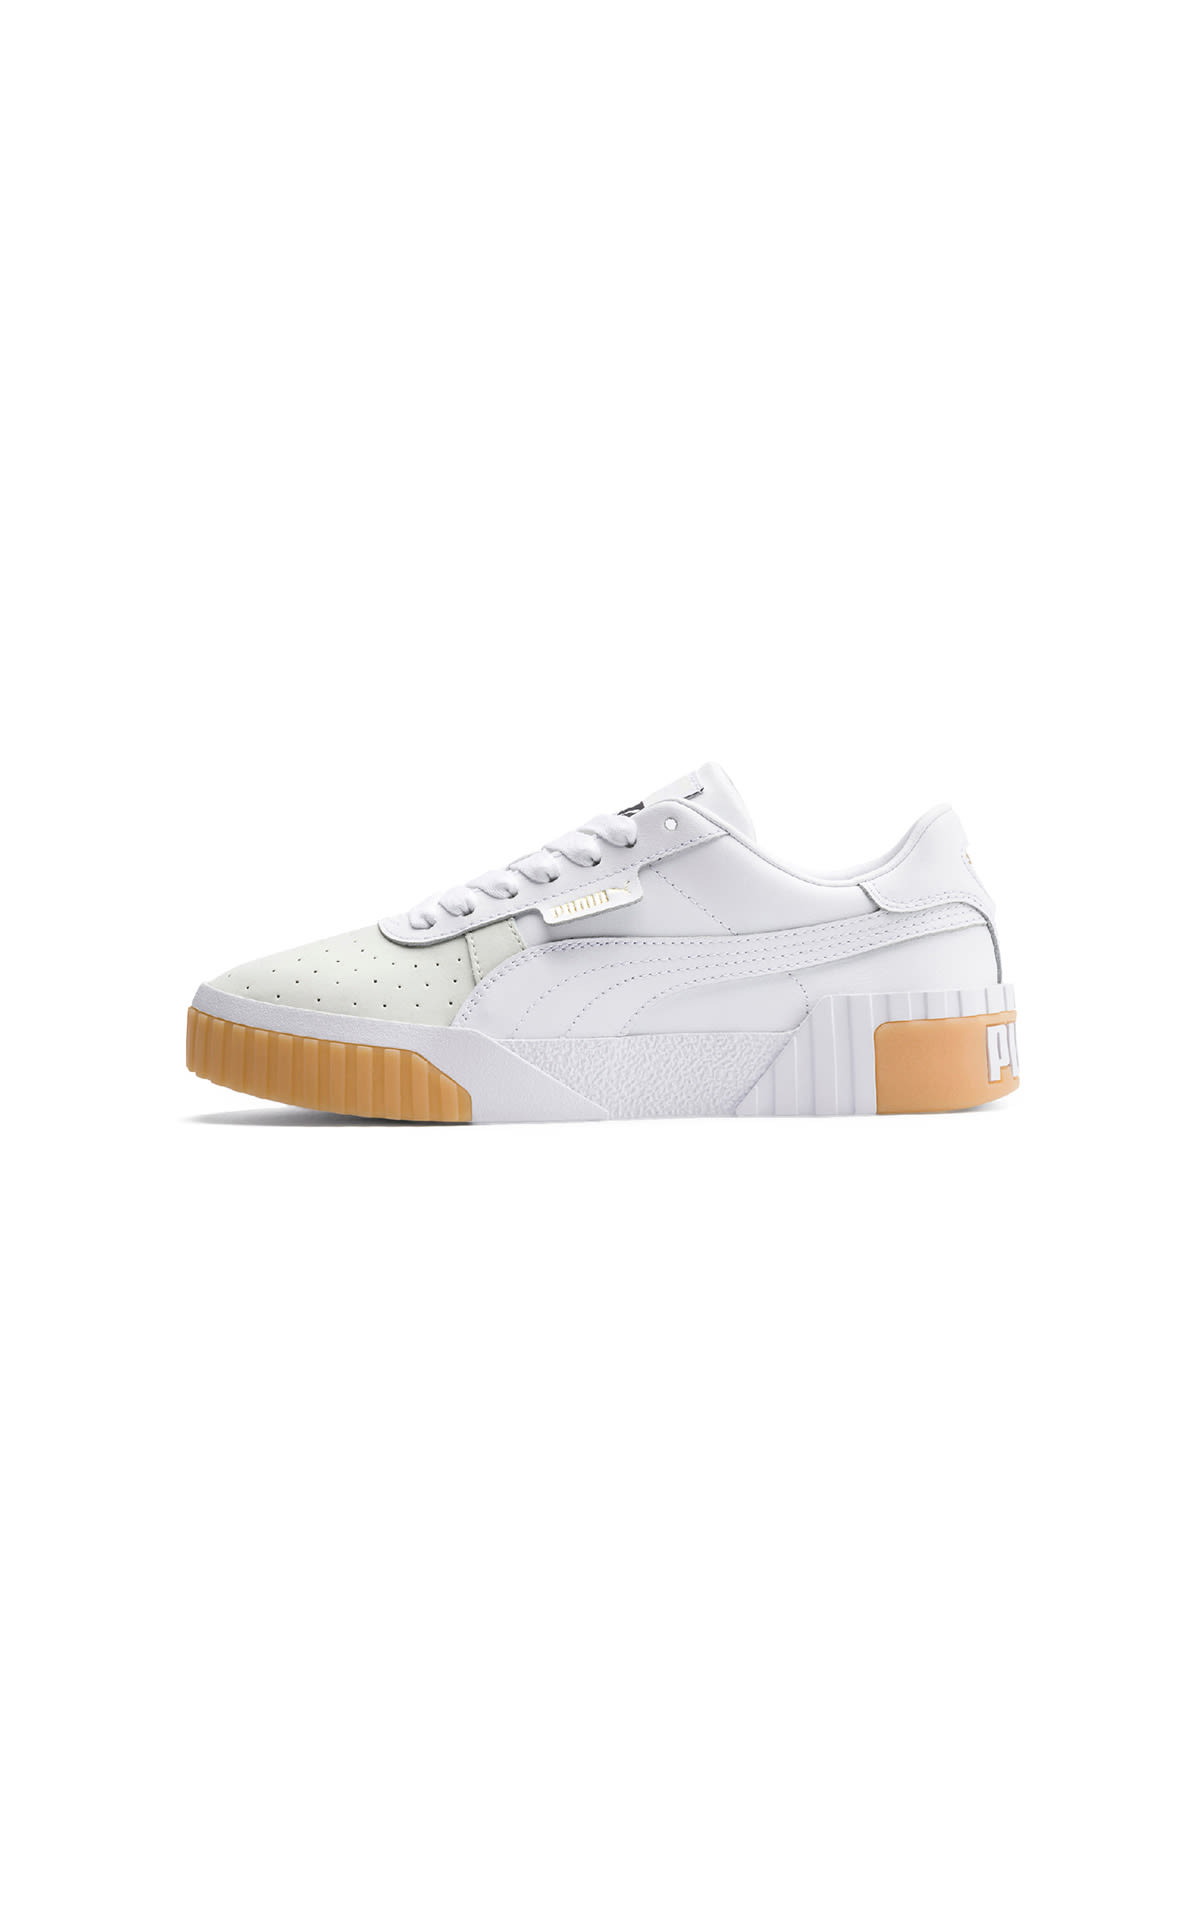 PUMA Cali exotic women's in white at The Bicester Village Shopping Collection